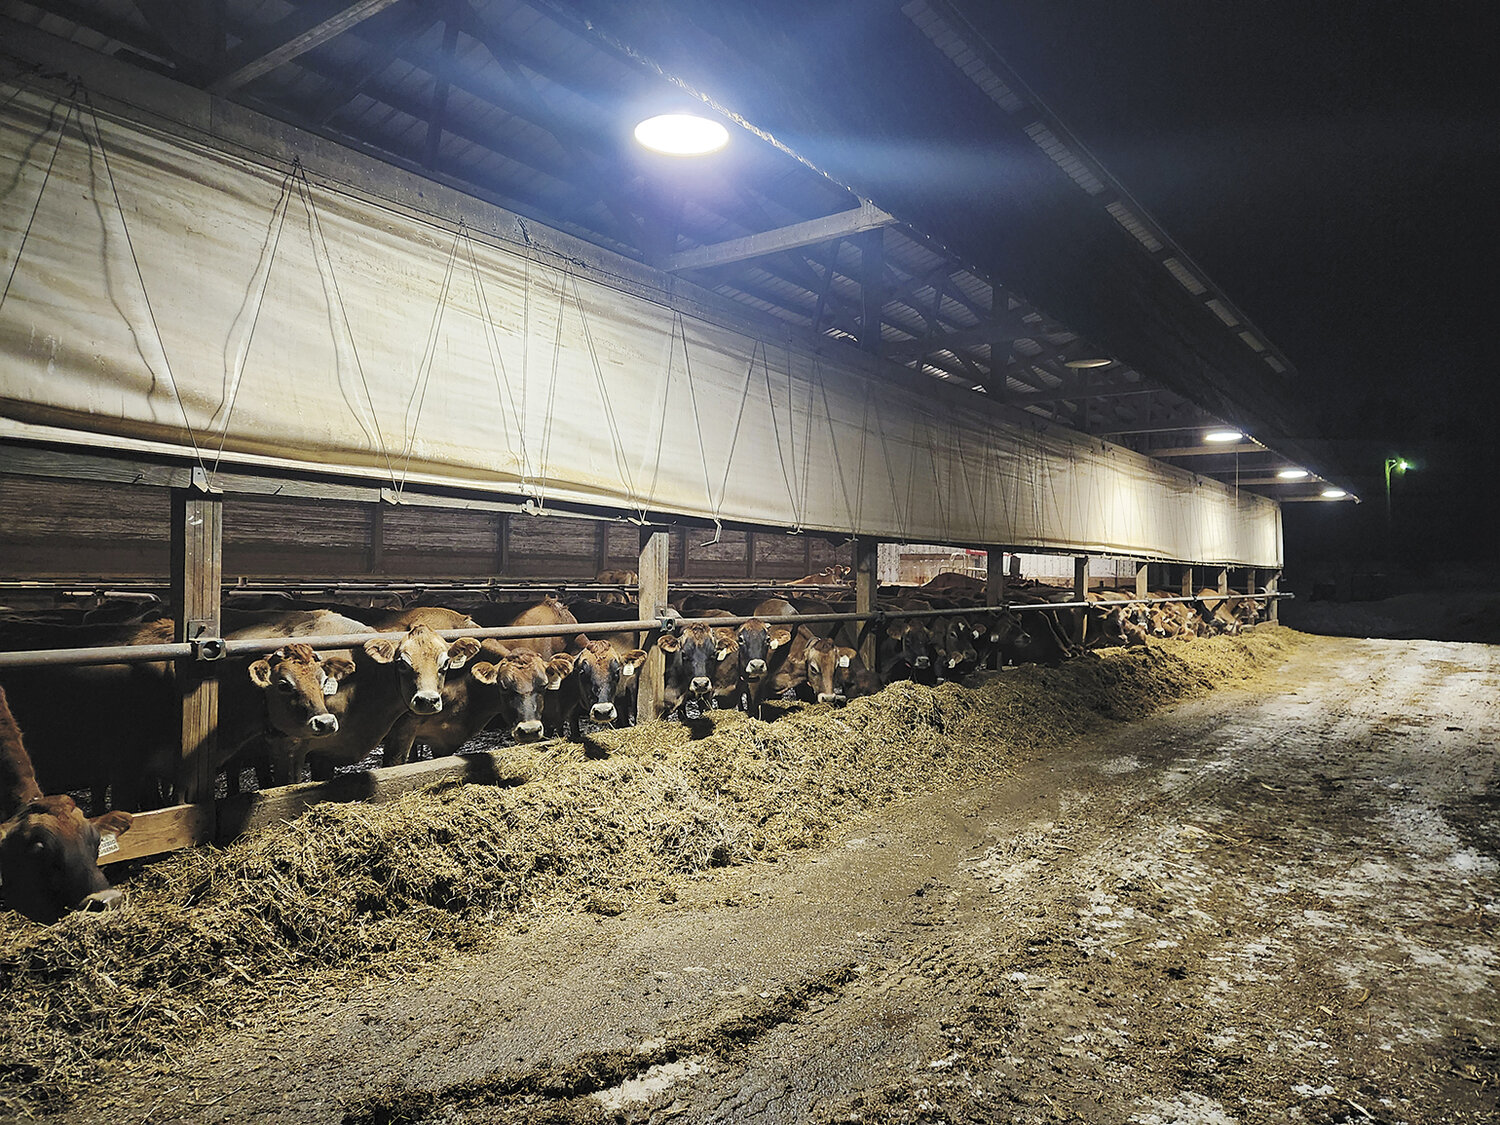 The cows get their fill at the bunk before settling in for the night Jan. 23 at Harvey and Jackie Menn’s farm near Norwalk, Wisconsin. The Menn family milks 90 certified-organic Jersey cows and is the recipient of the 2023 Monroe County Conservation Farmer of the Year award.